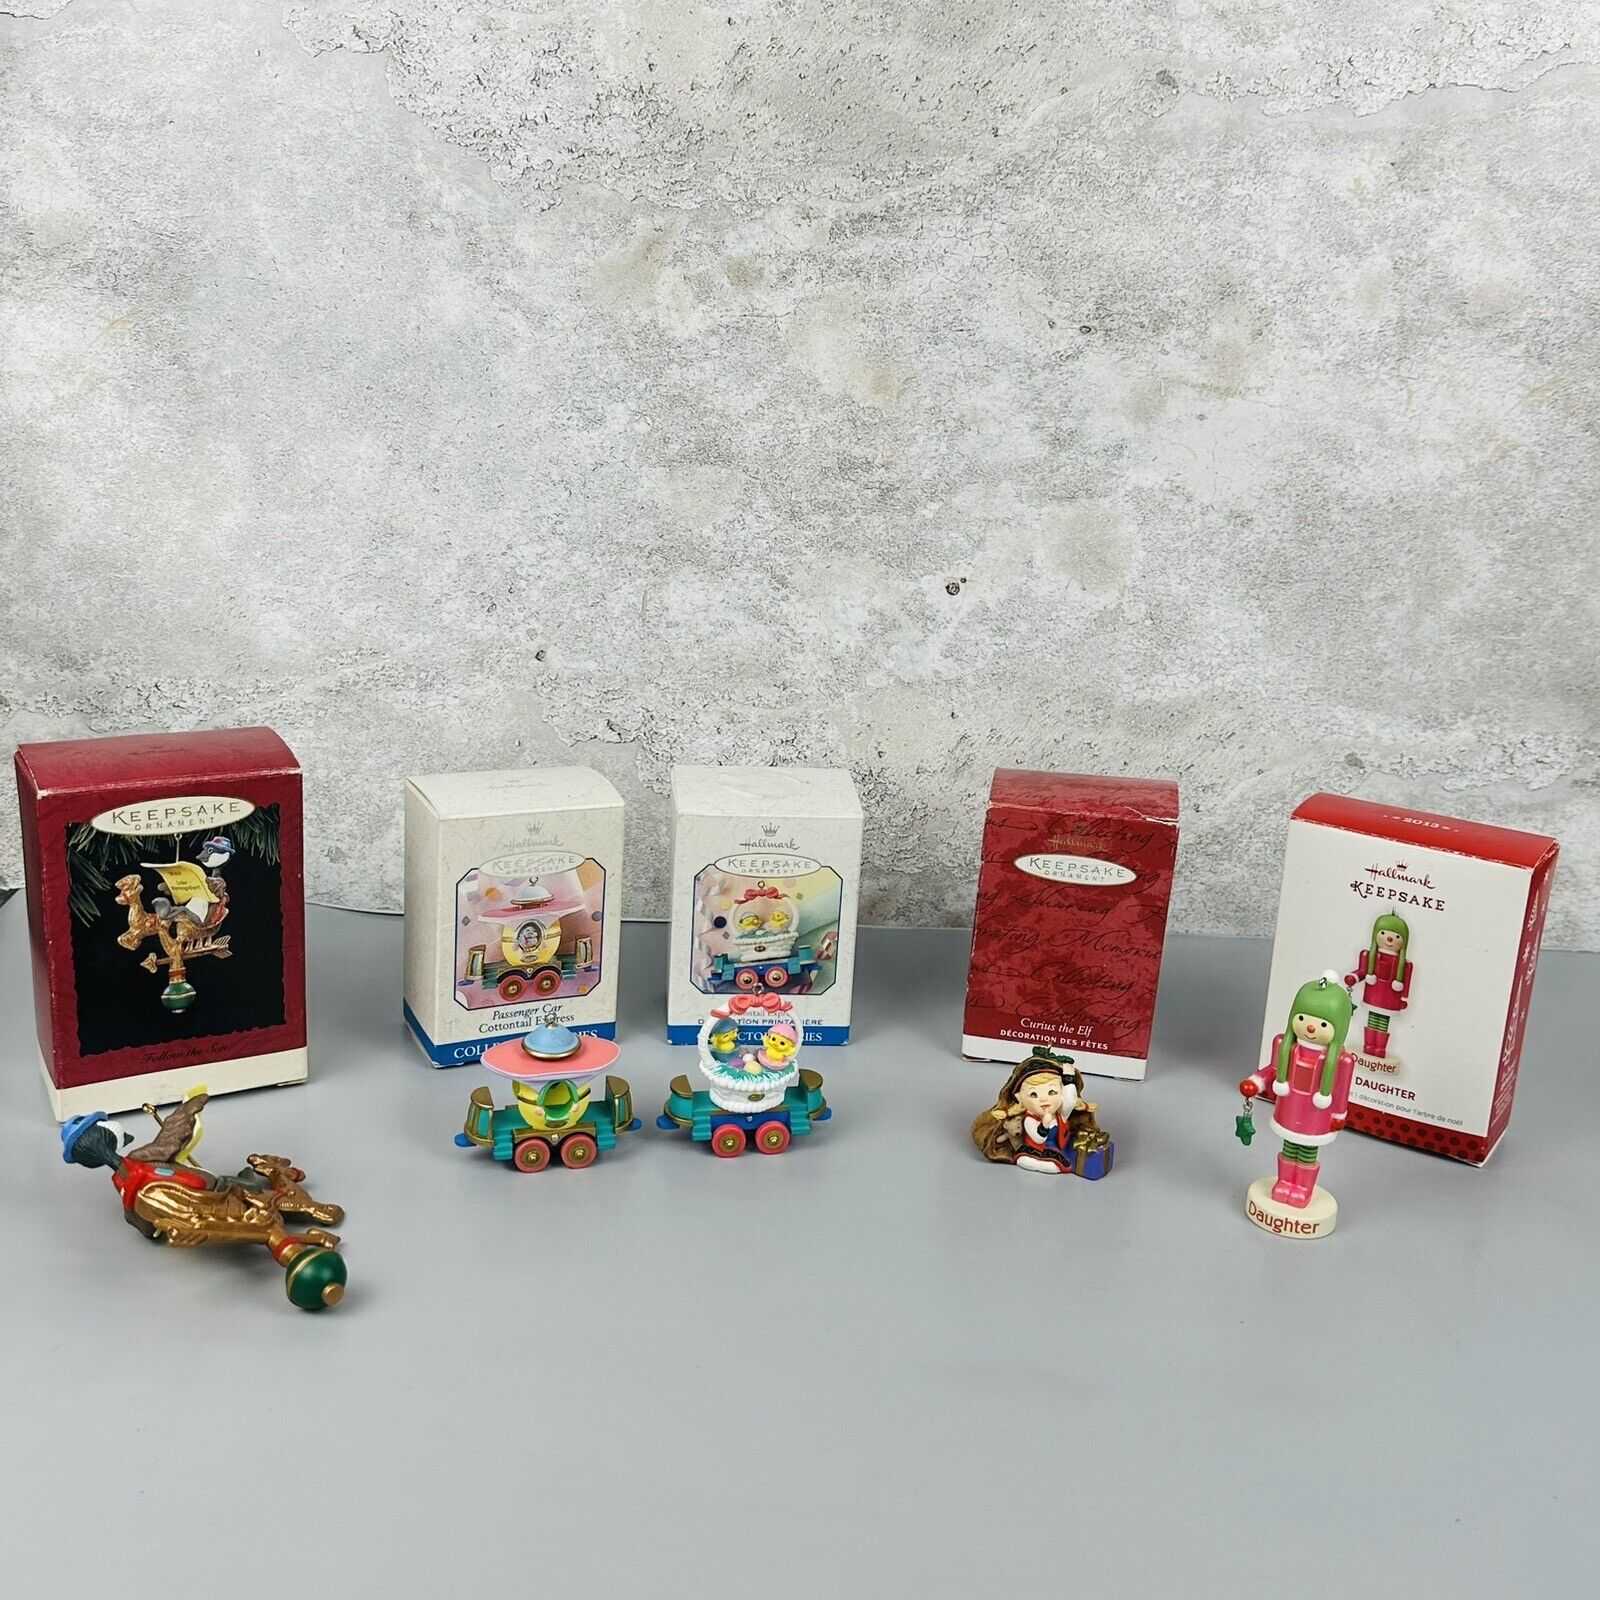 Assorted Hallmark Keepsake Christmas Ornaments Lot of 5 1994-2013 with Boxes